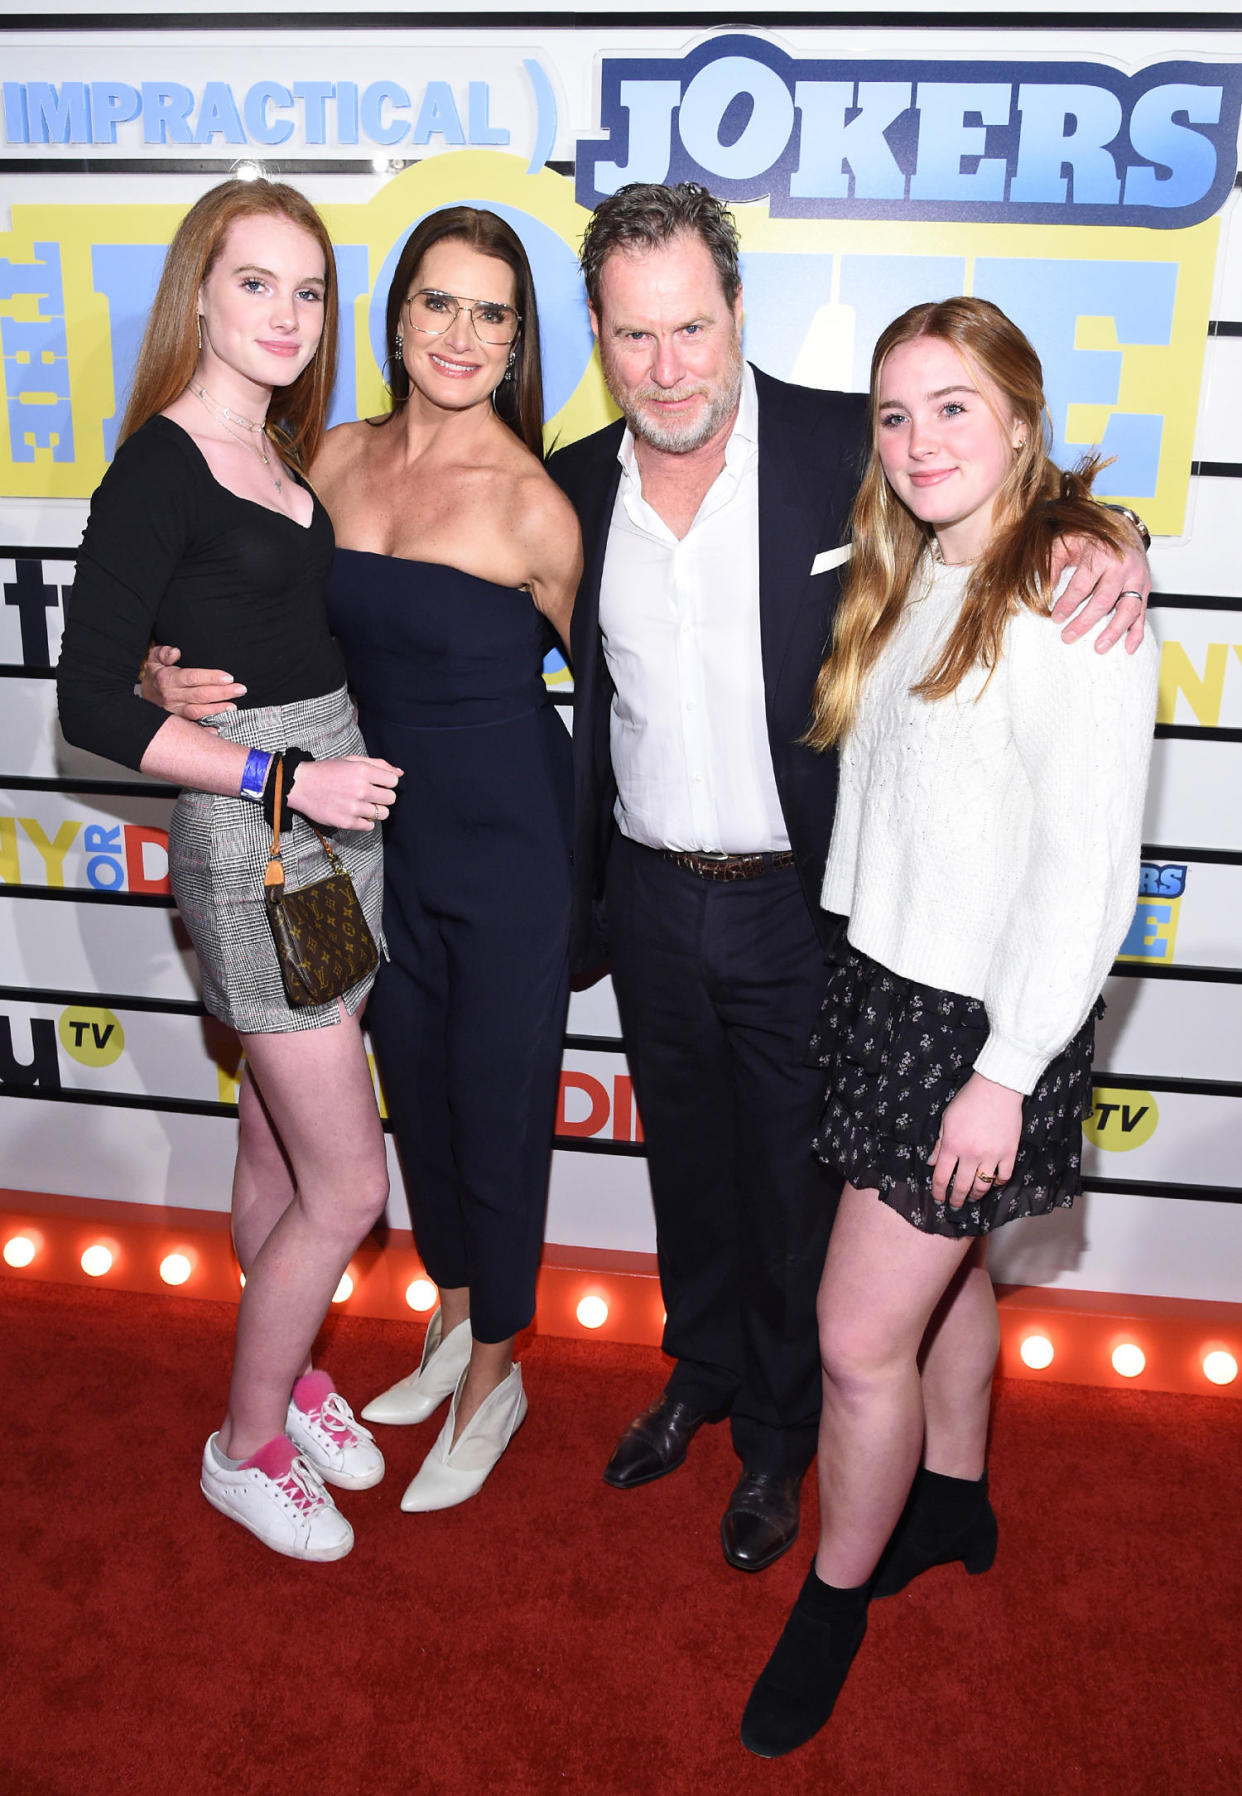 Brooke Shields, Chris Henchy, Rowan Henchy, and Grier Henchy (Jamie McCarthy / Getty Images)